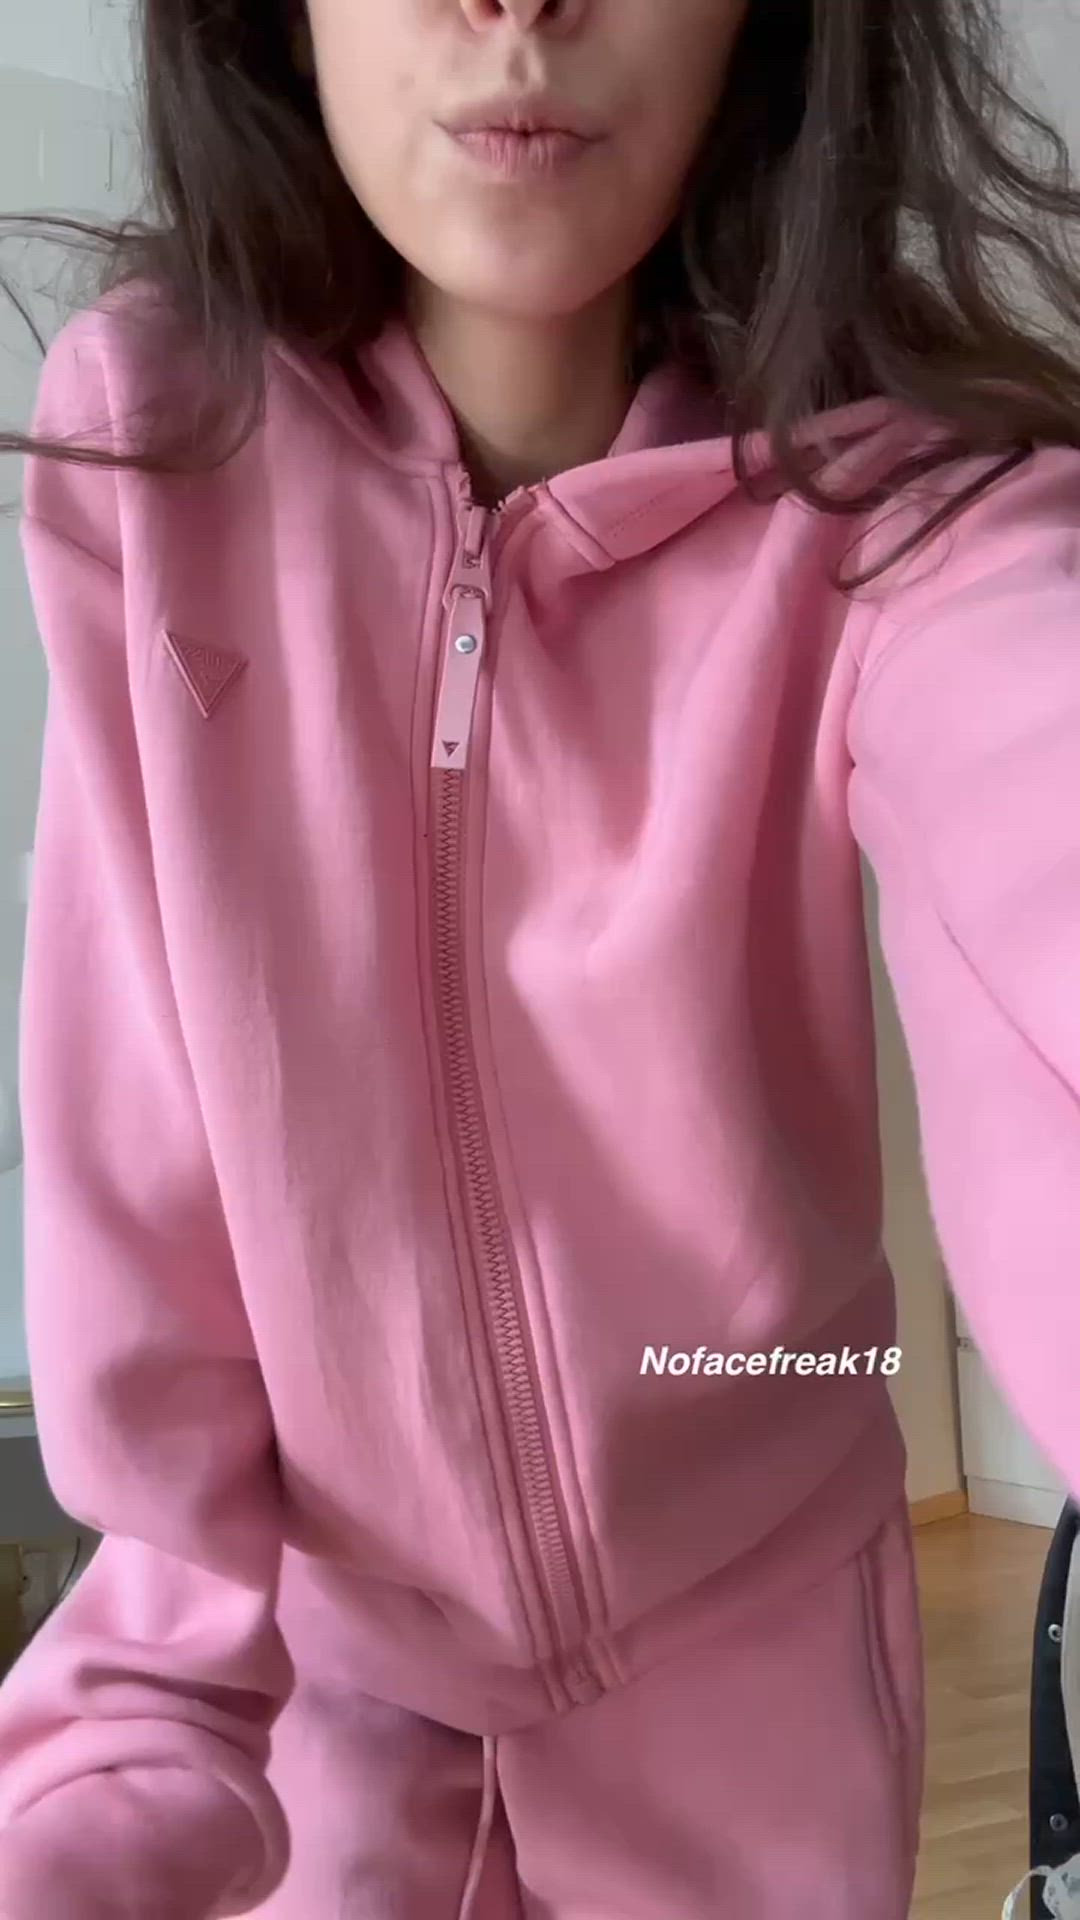 Ass porn video with onlyfans model nofacefreak18 <strong>@nofacefreak_18</strong>